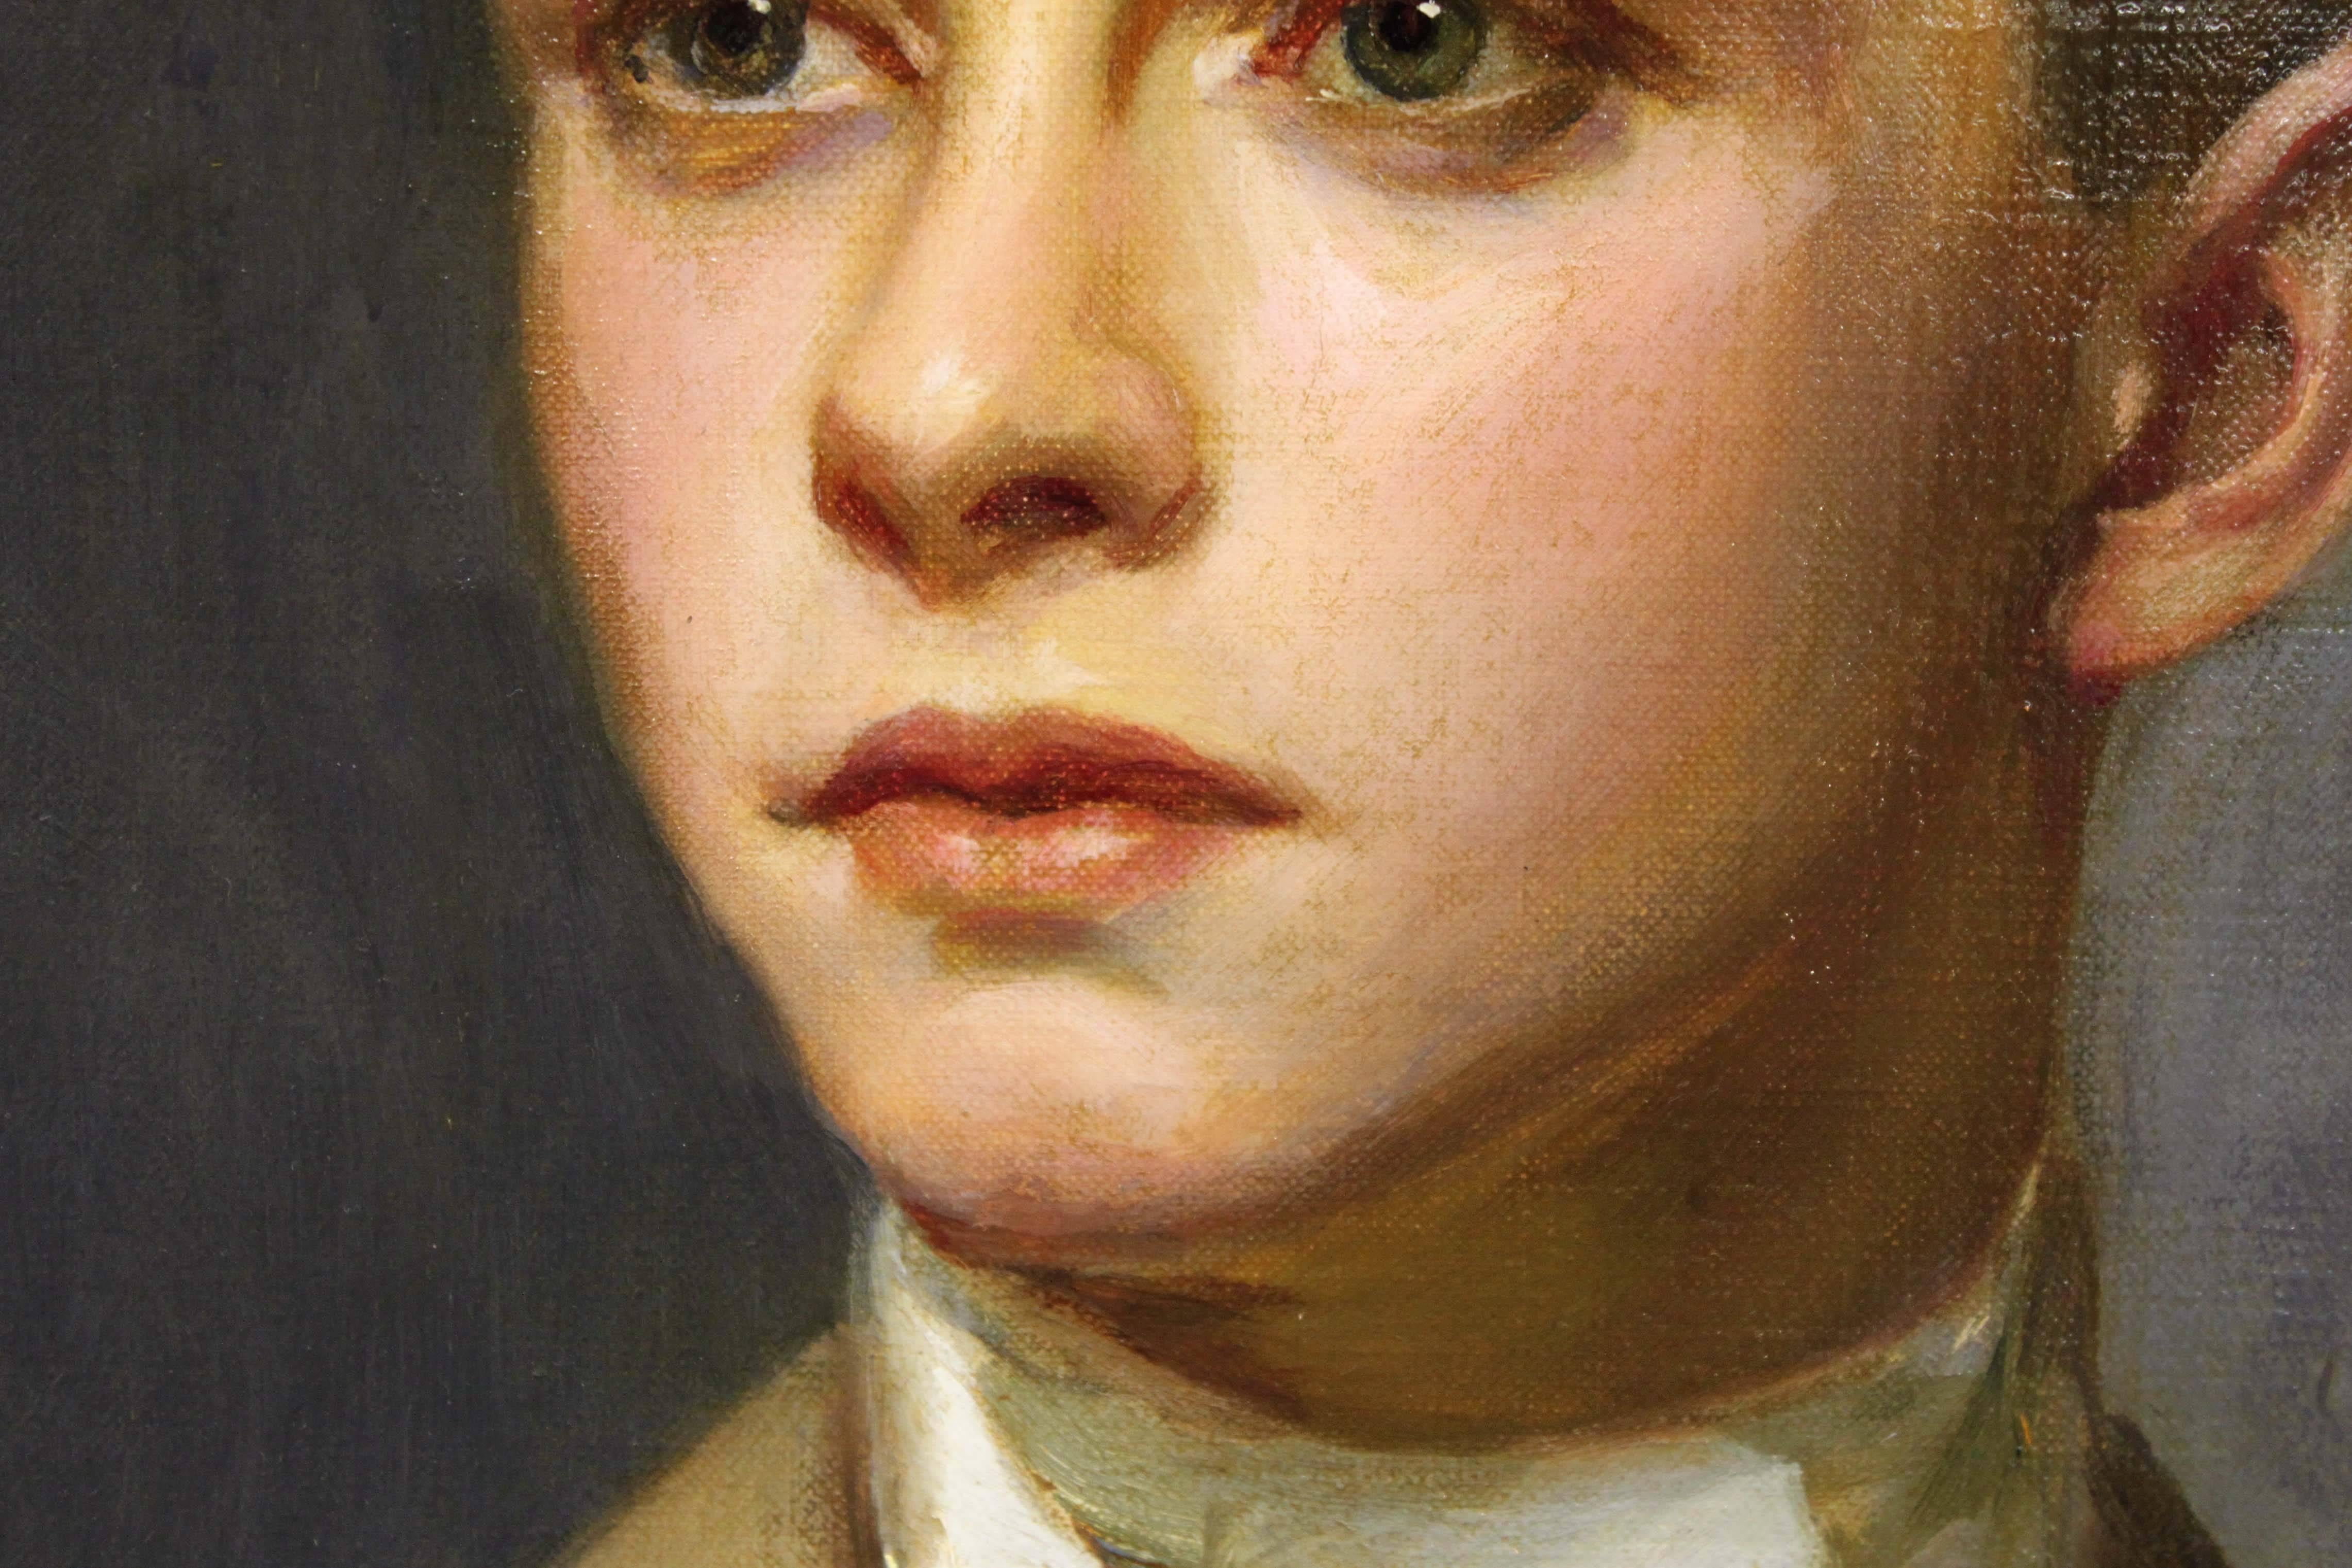 Portrait of a young man, oil on canvas attributed to English painter Oswald Birley. This painting was originally larger, likely life-size/standing, and was cut down possibly when the owner moved to a smaller residence. It's speculated that the